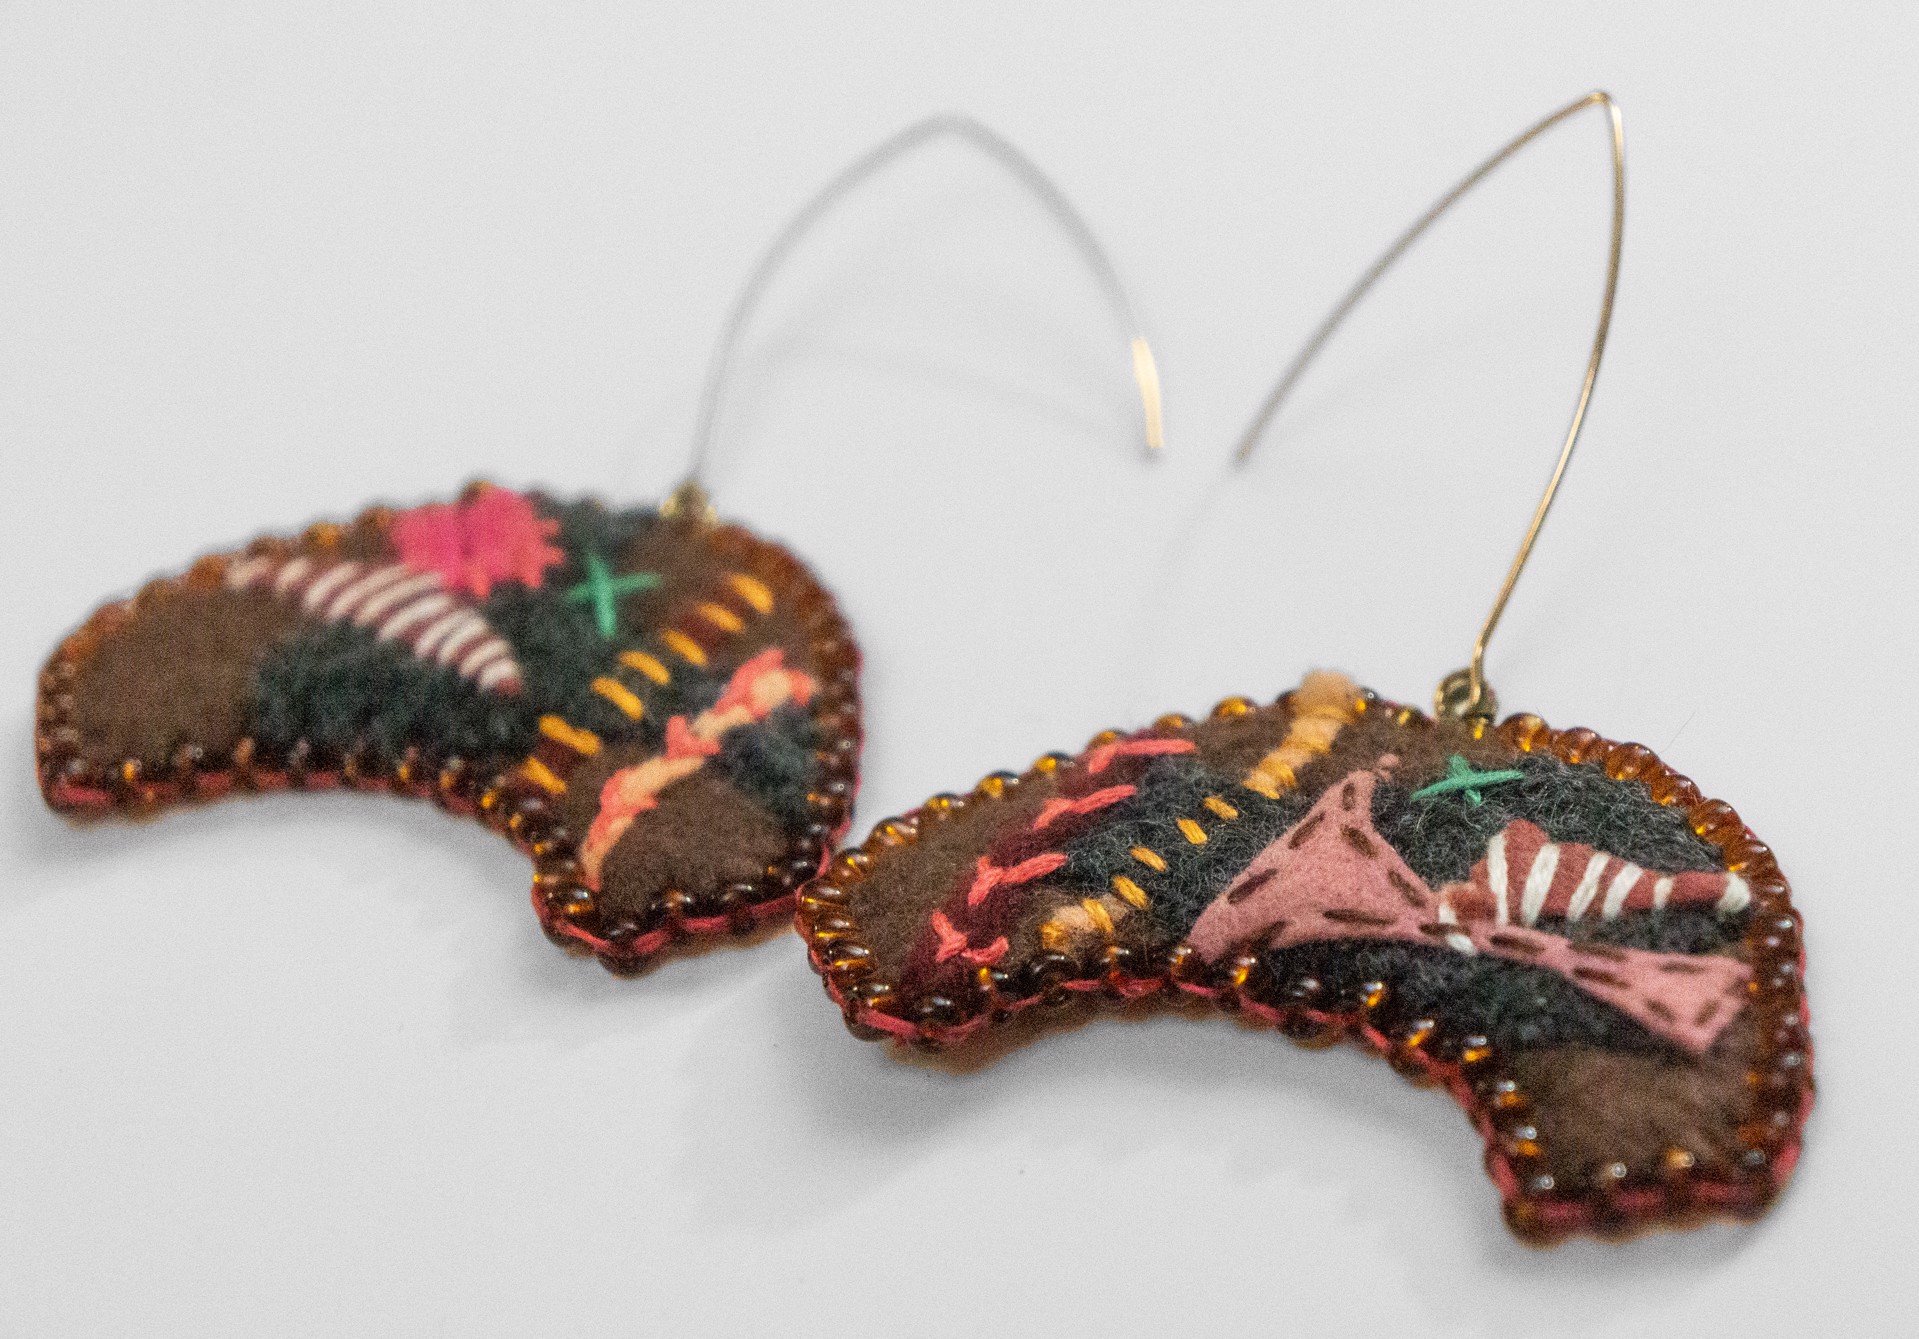 Embroidered statement earrings by Hattie Lee Mendoza